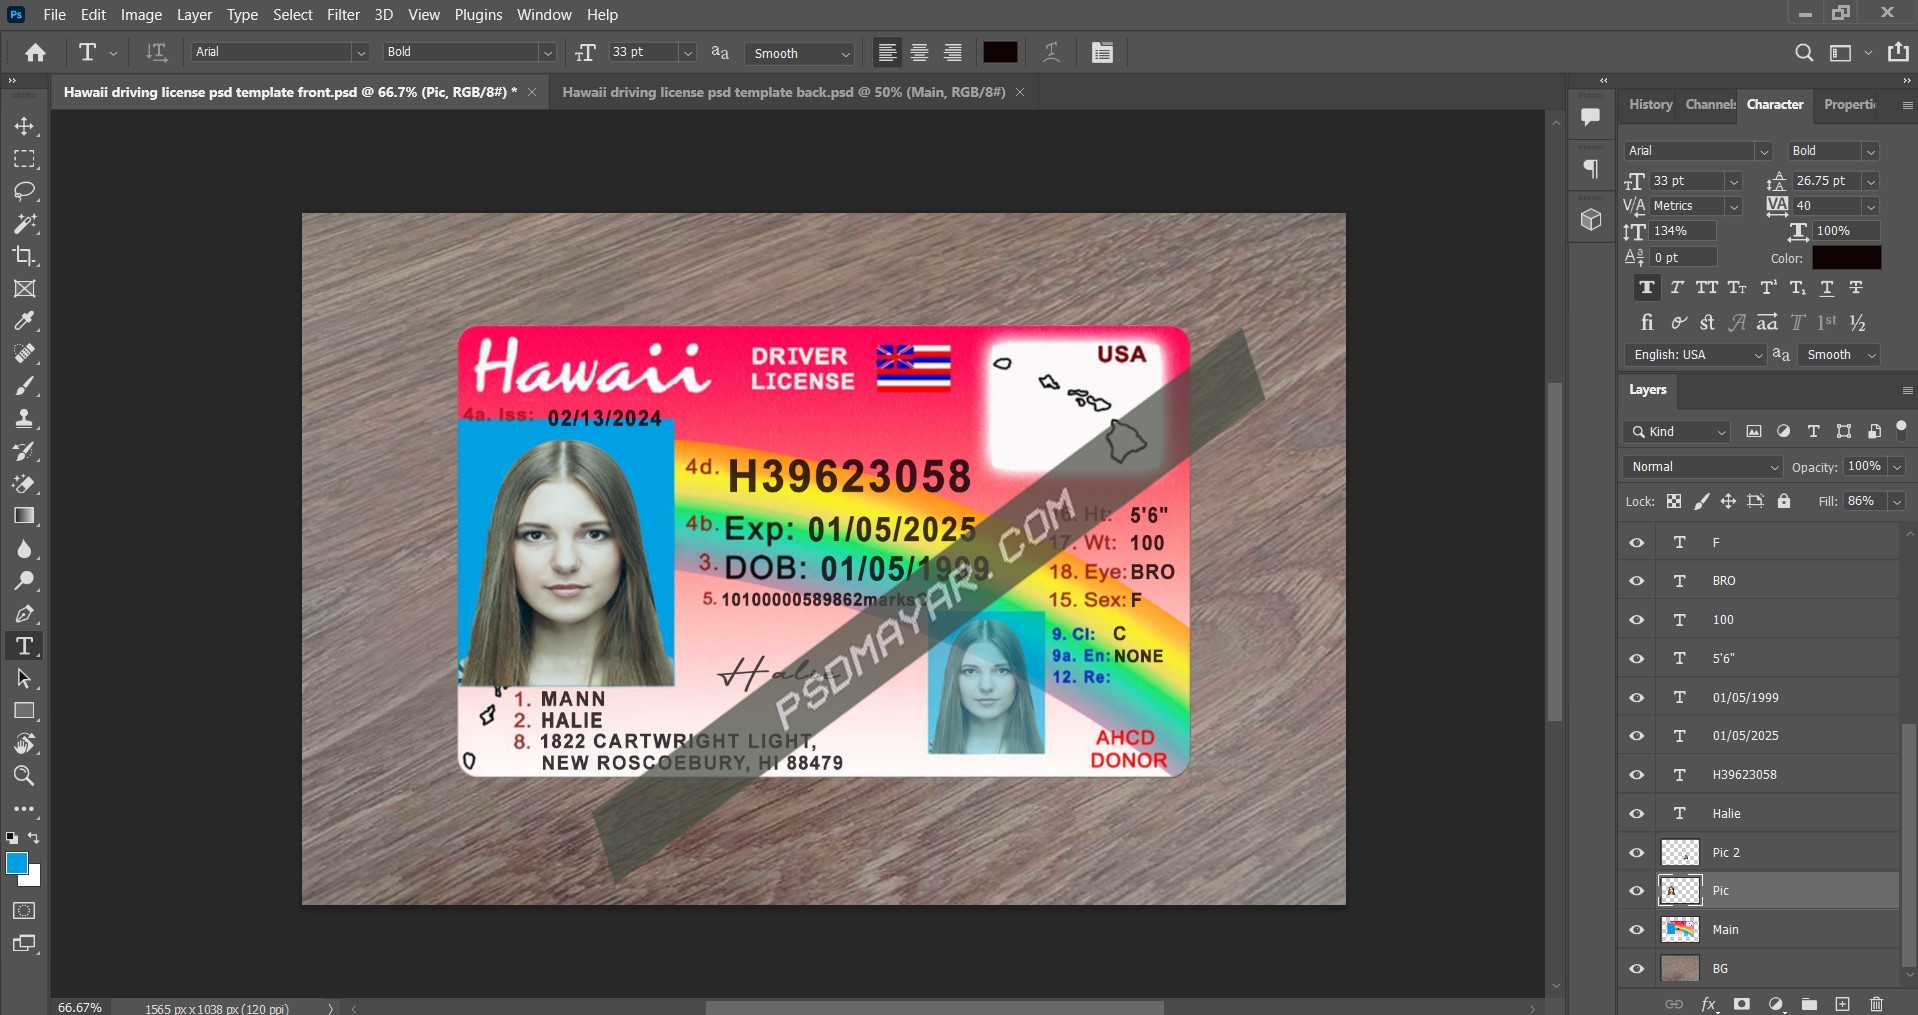 Usa hawaii driving license psd template download